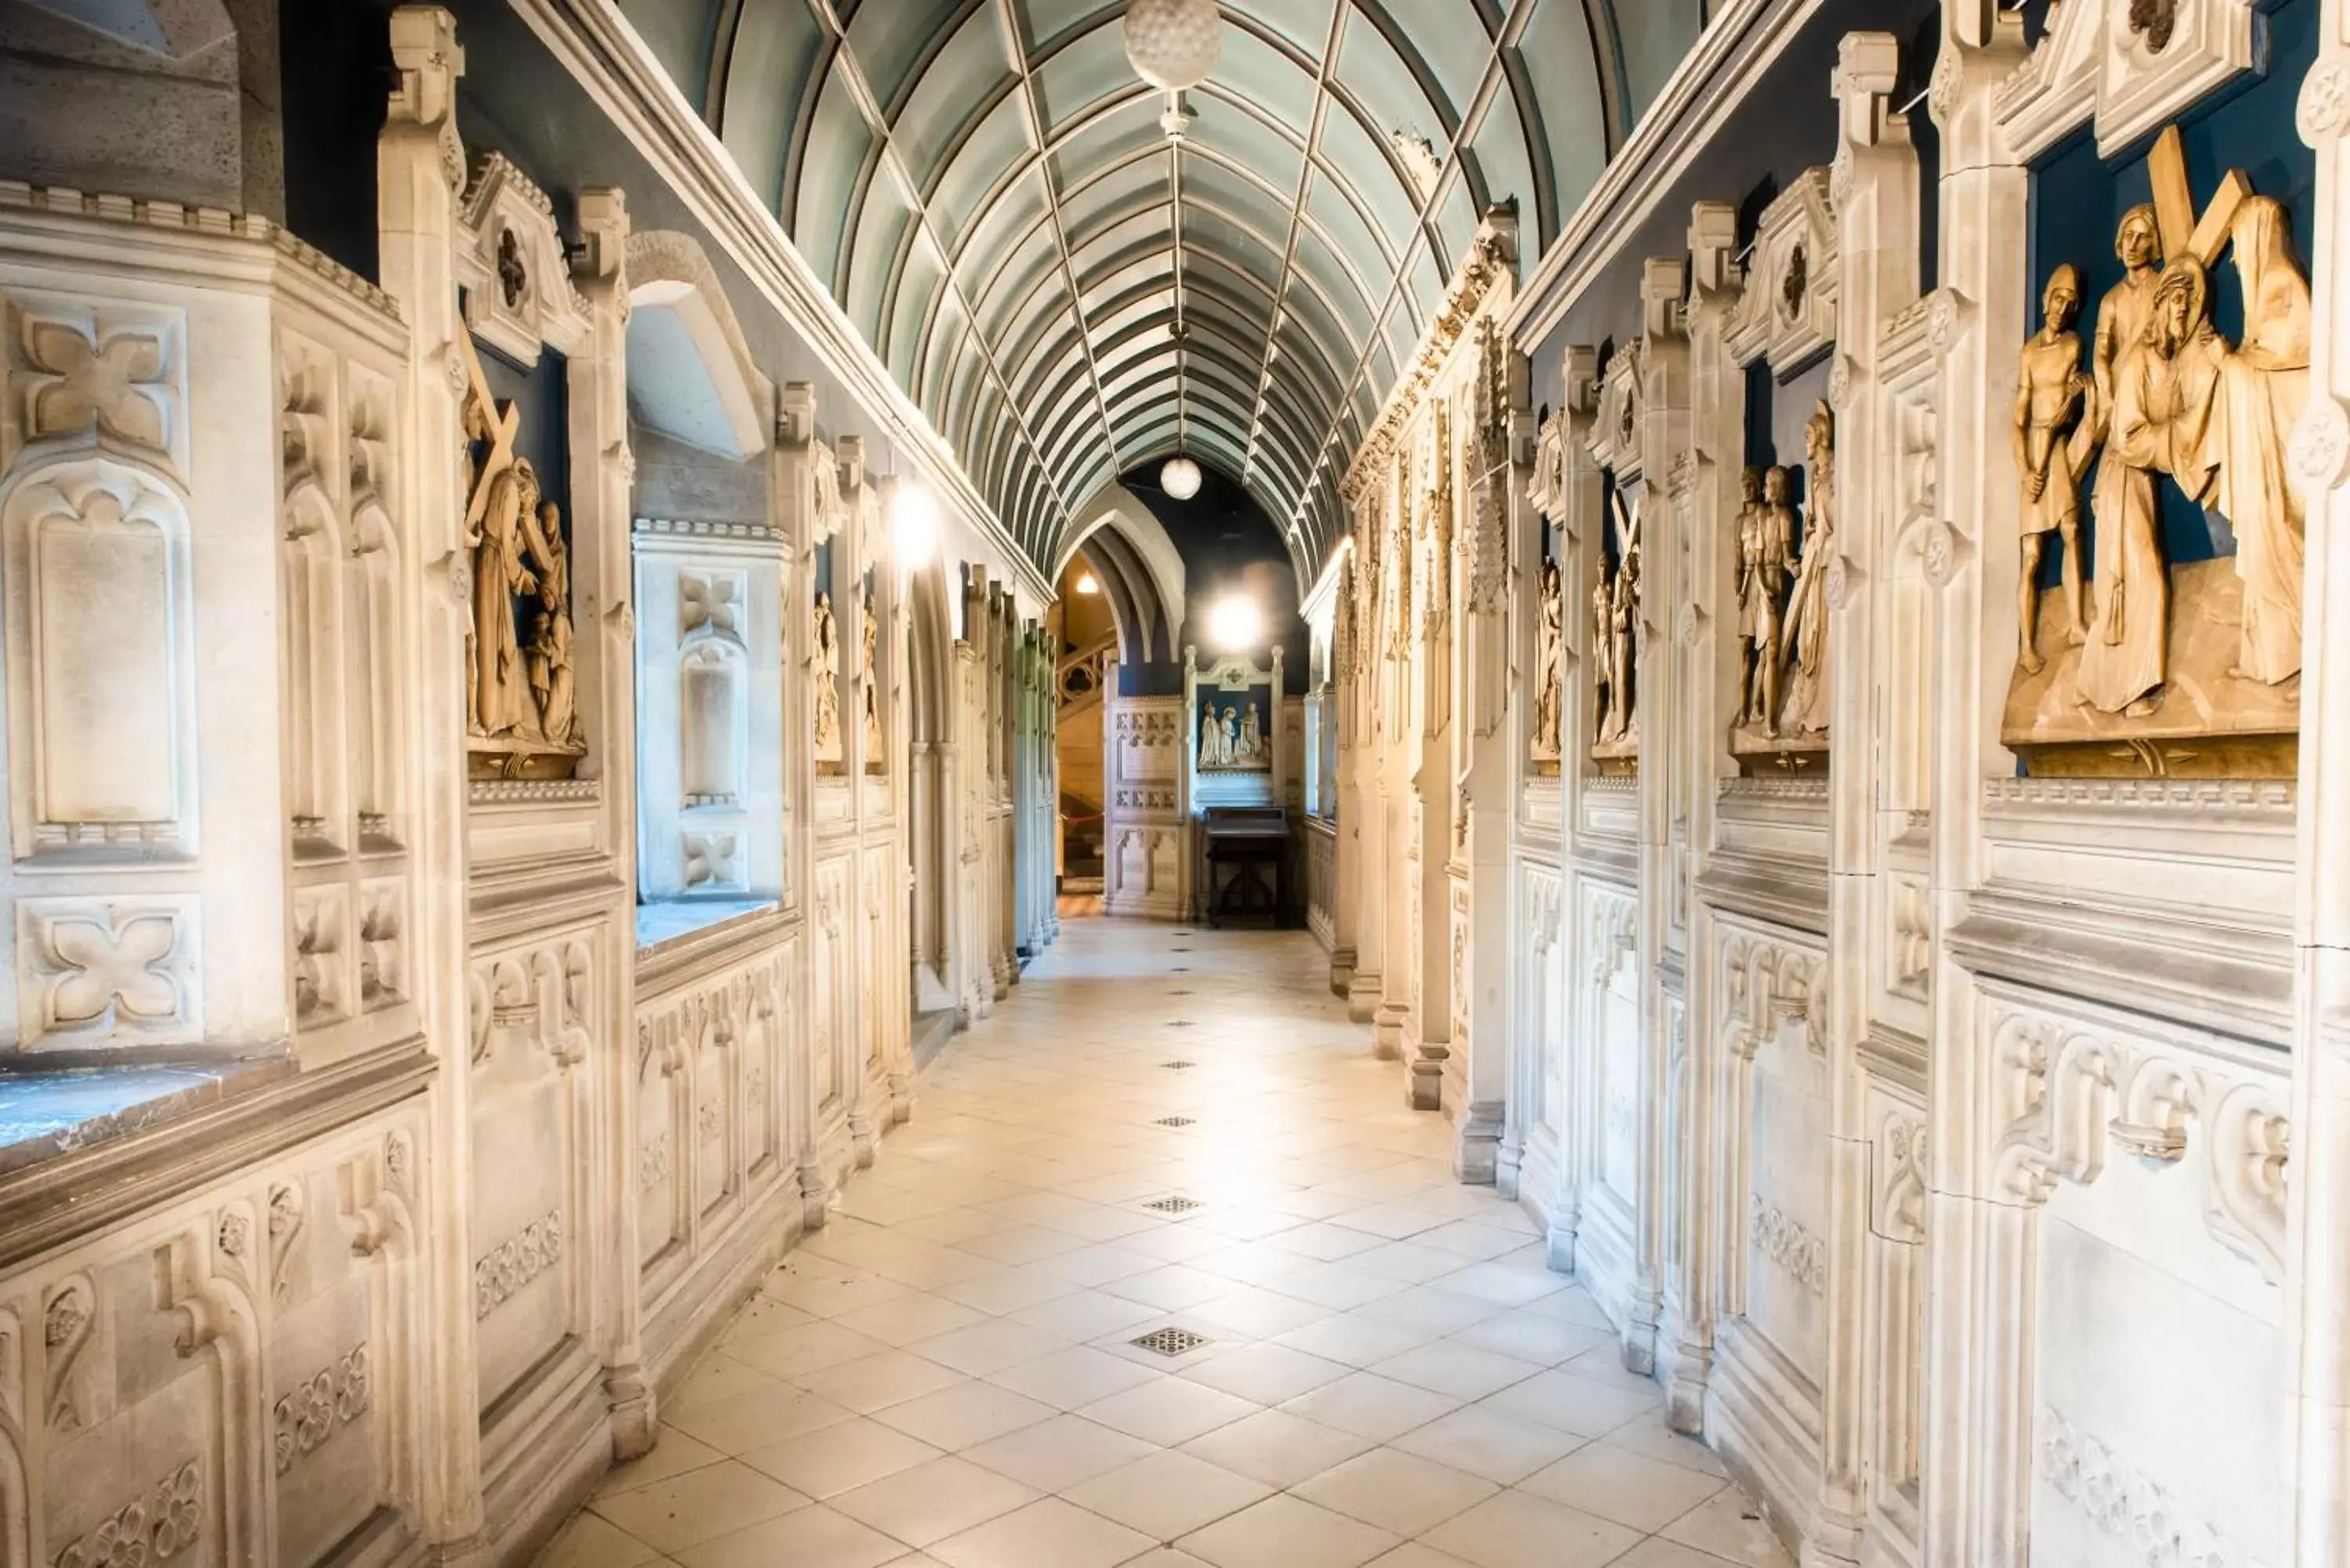 Area and facilities in Ushaw Historic House, Chapels & Gardens